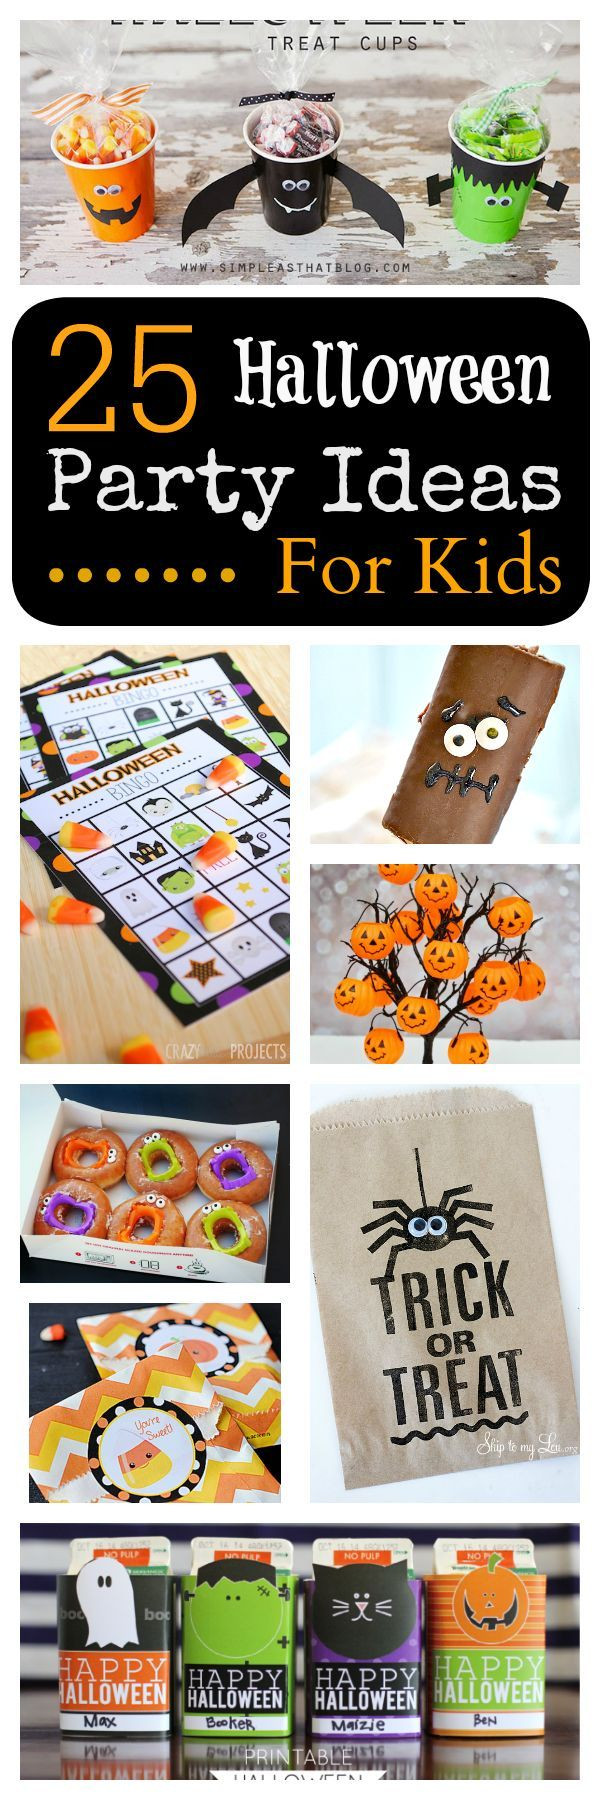 Halloween Ideas For School Party
 schoolhalloween halloweenpartyideas for